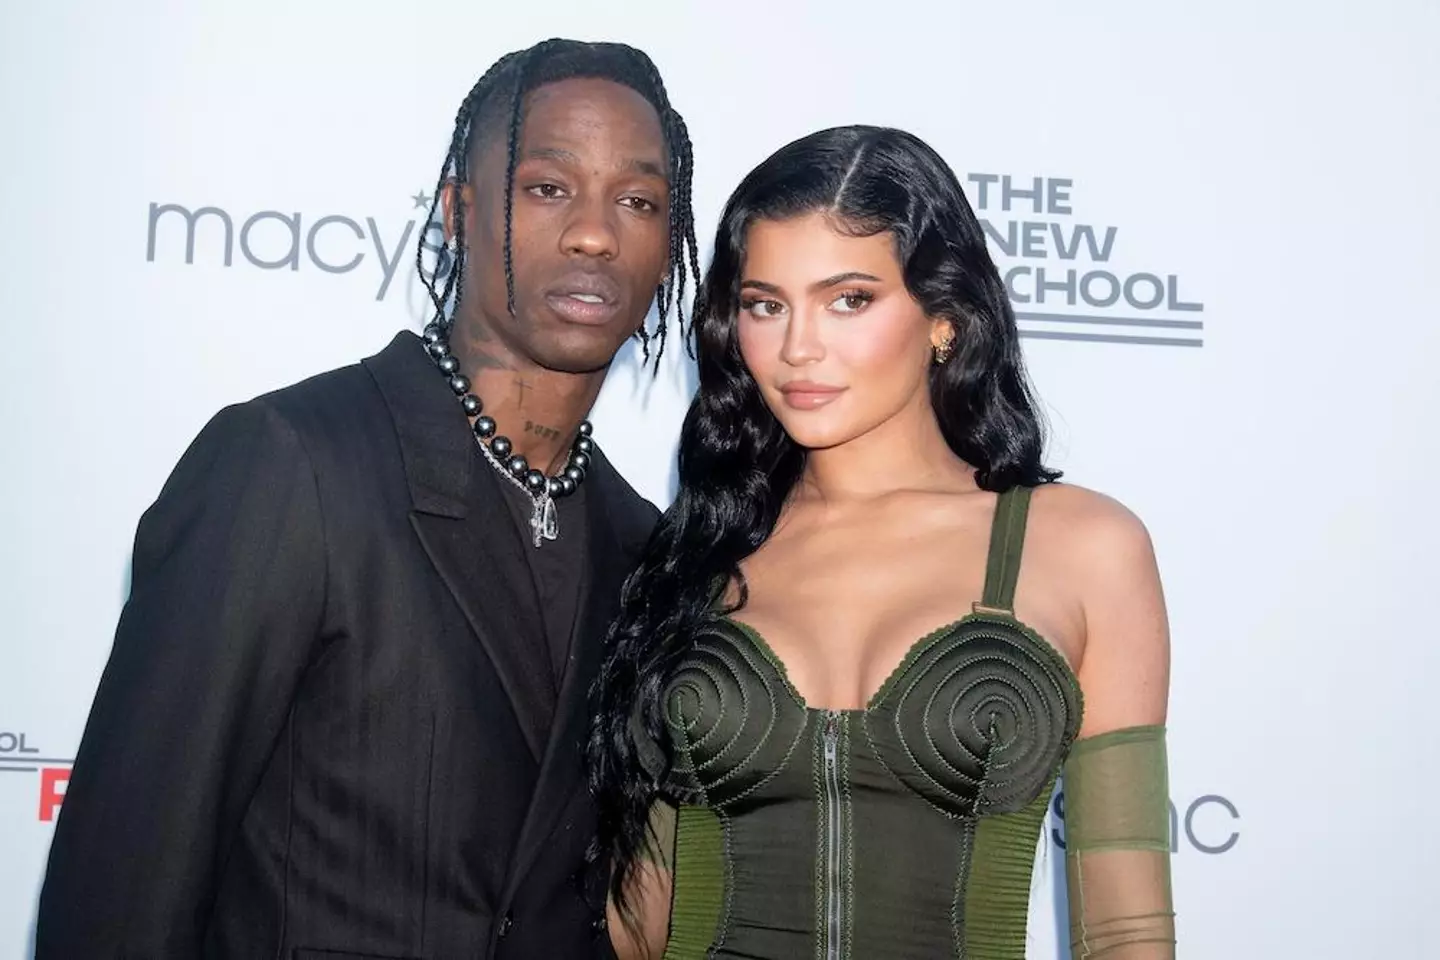 Kylie Jenner and Travis Scott are yet to reveal their son's name.